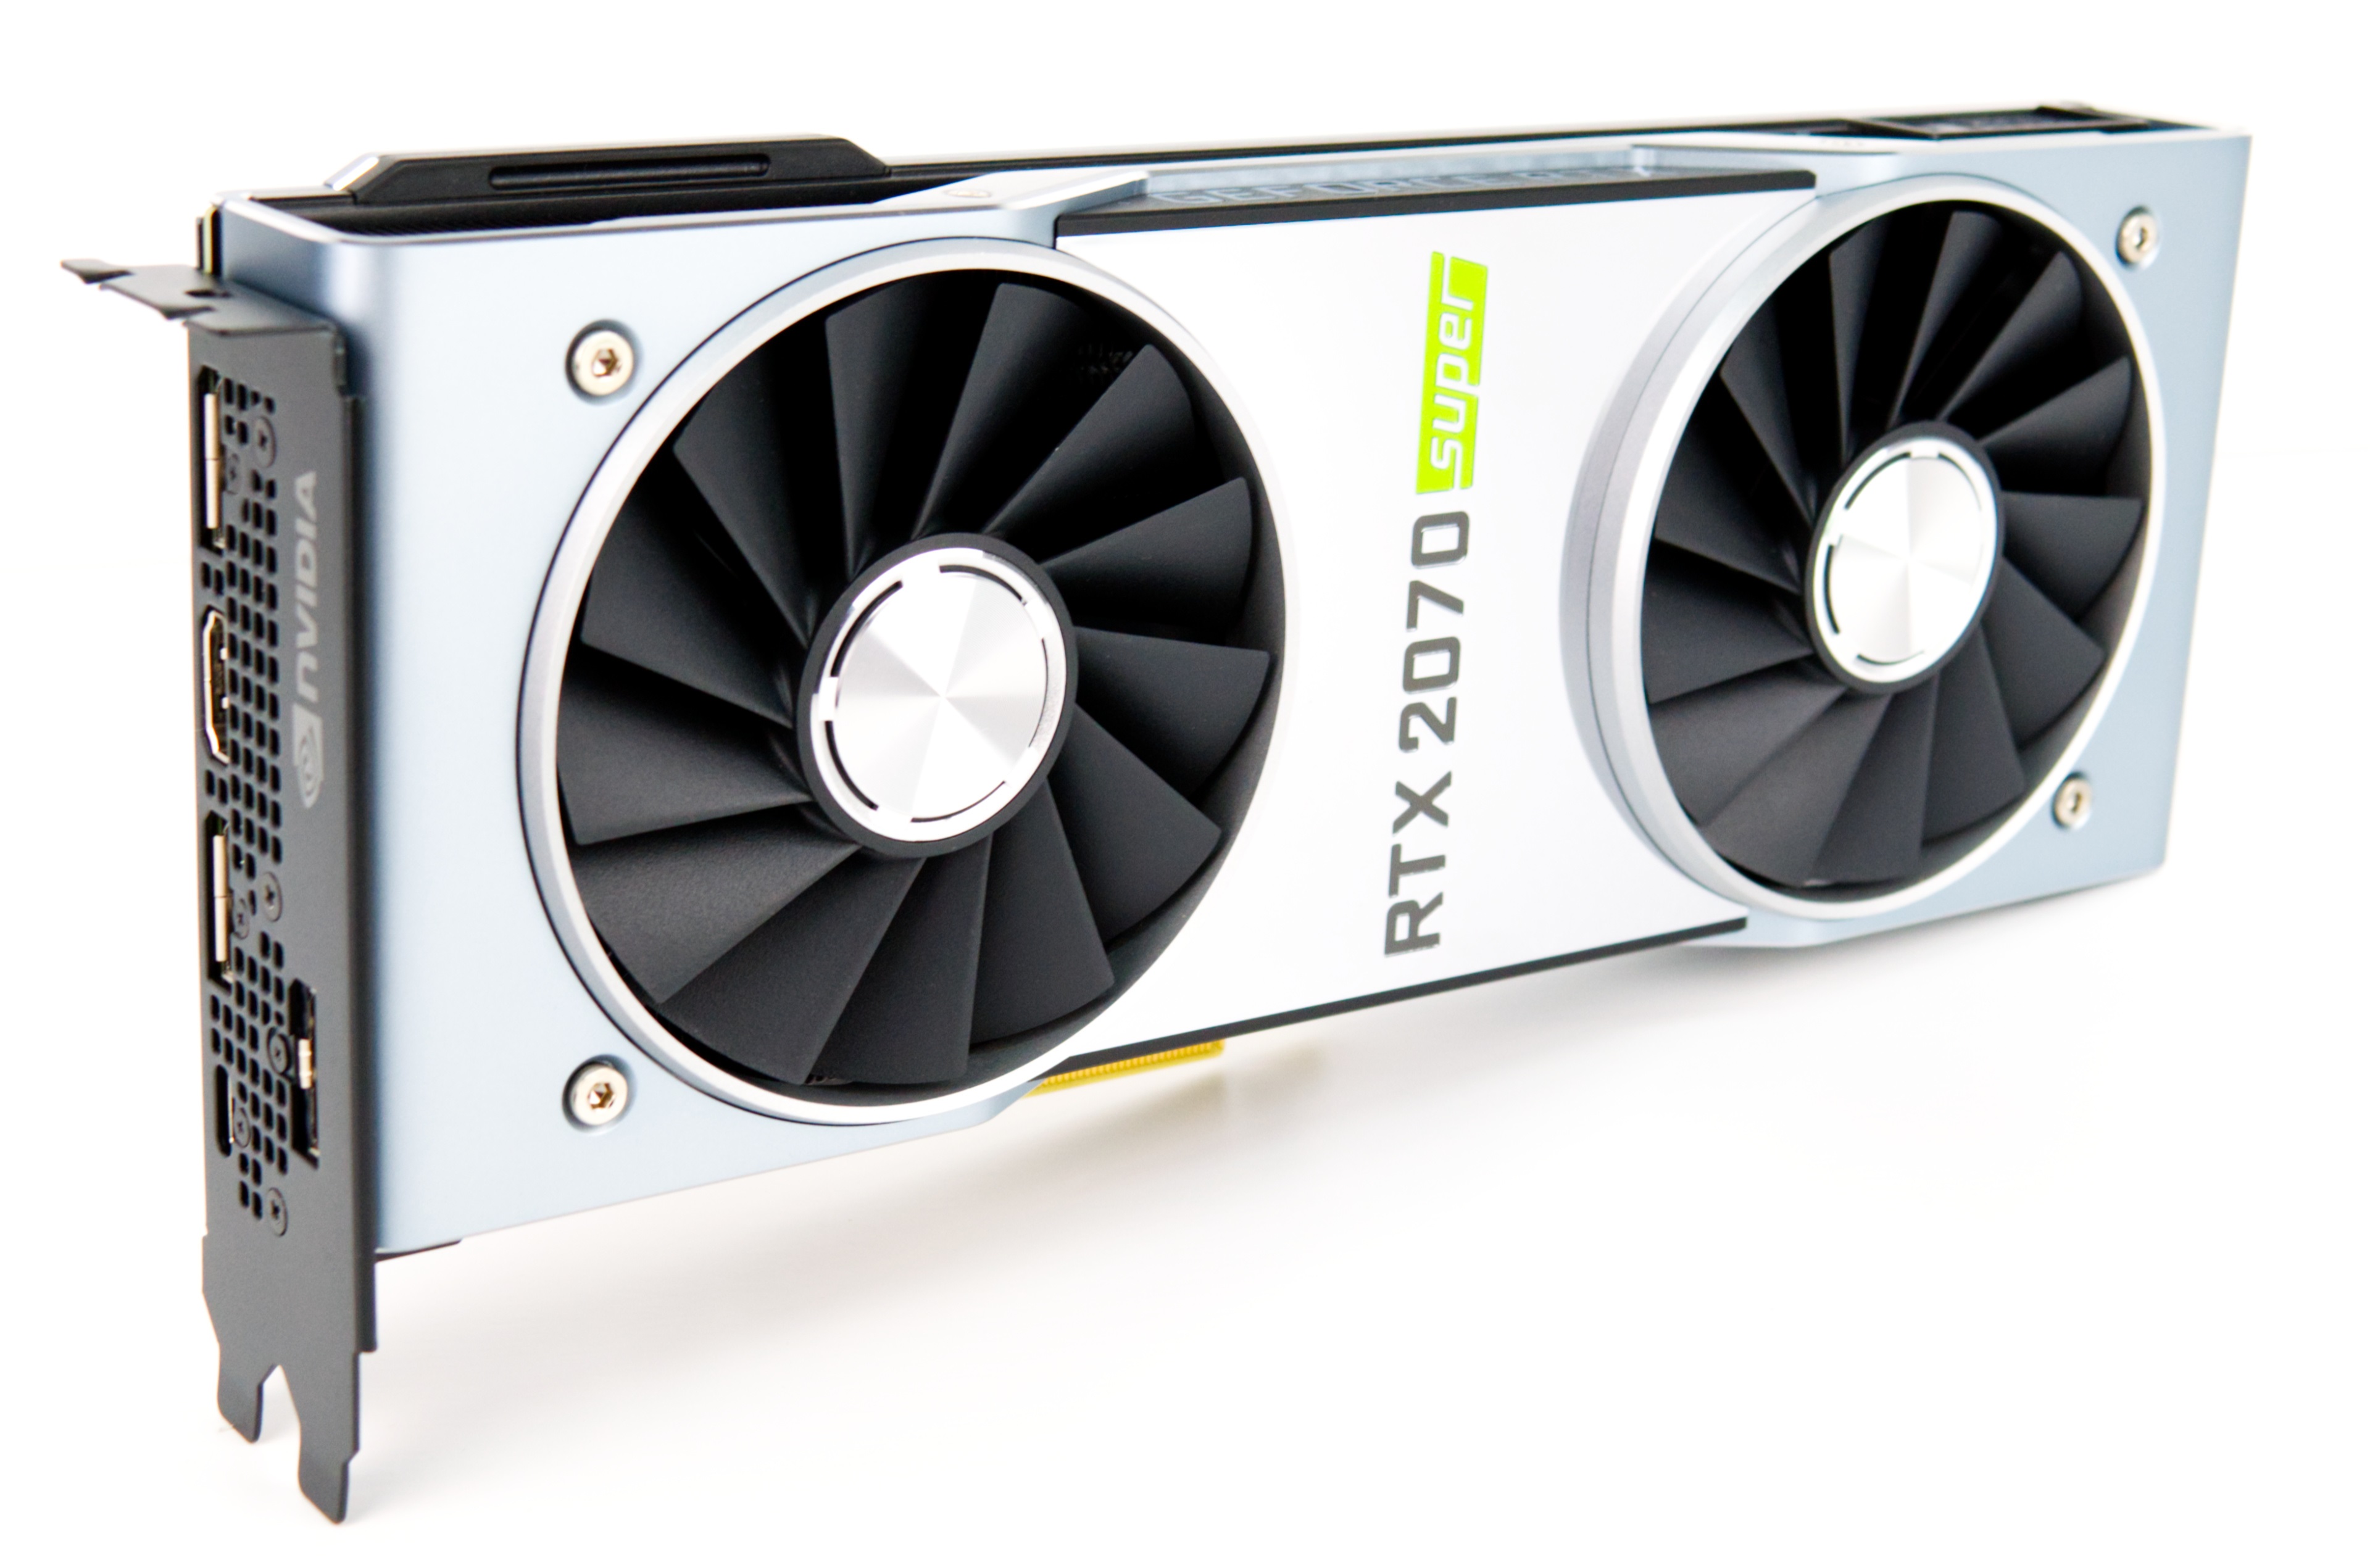 NVIDIA GeForce RTX 2070 SUPER Desktop GPU Review: In touching distance of the GeForce RTX 2080 - NotebookCheck.net